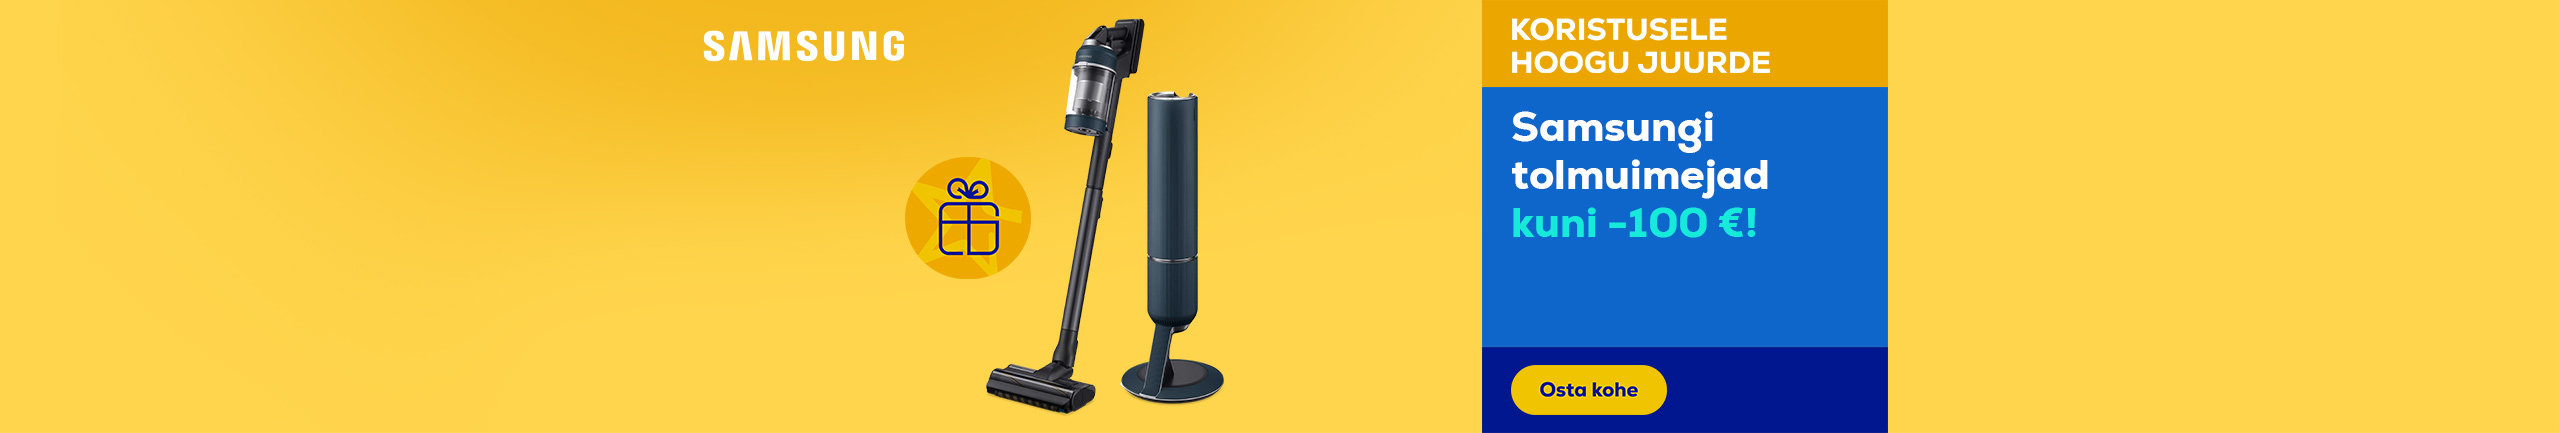 Buy Samsung vacuum and receive an electric toothbrush as a gift!